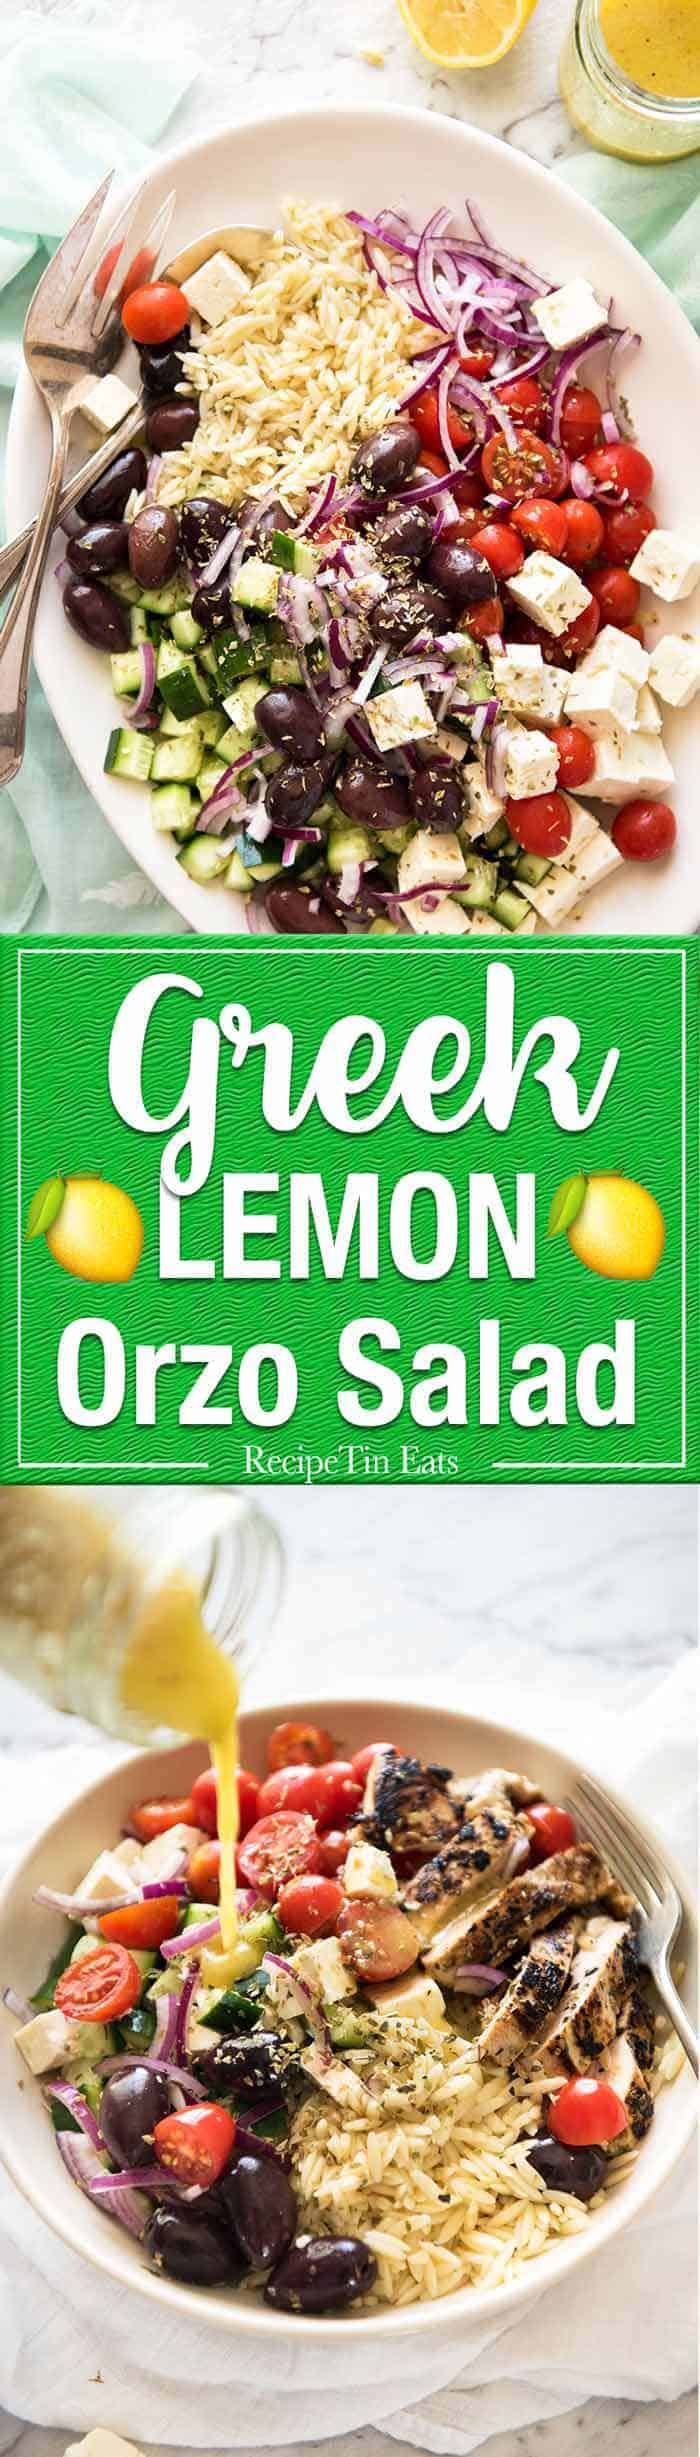 Greek Lemon Orzo Salad (Risoni) - All the fixings of a Greek Salad tossed through orzo / risoni and dressed with a gorgeous zesty lemon vinaigrette. www.recipetineats.com